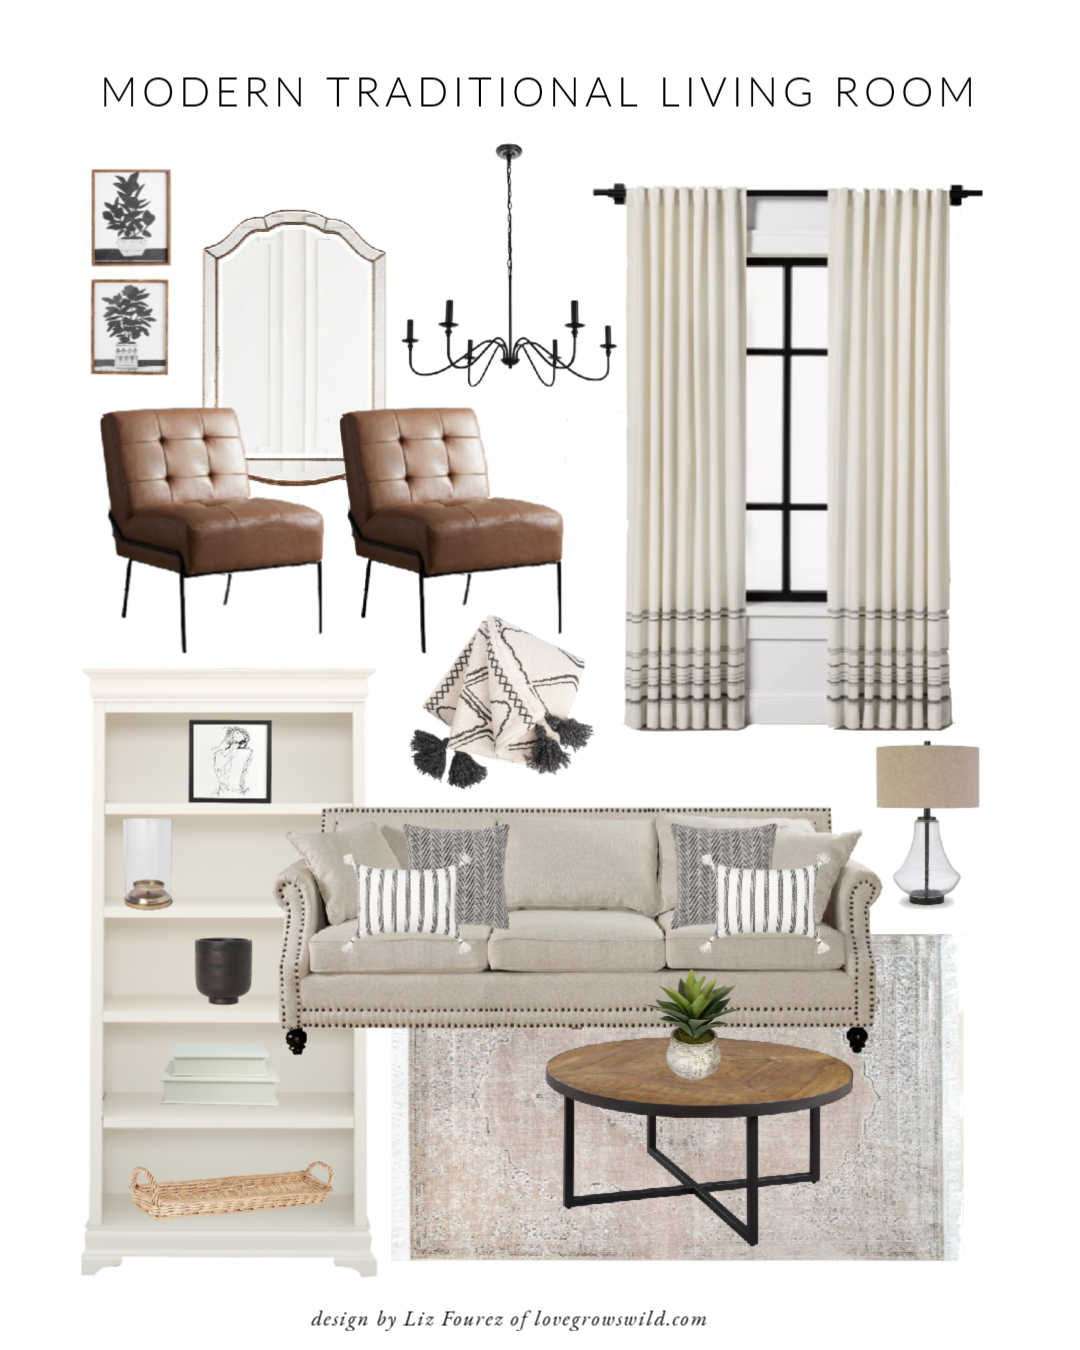 See all the pieces used in this Modern Traditional Living Room design by Liz Fourez of LoveGrowsWild.com